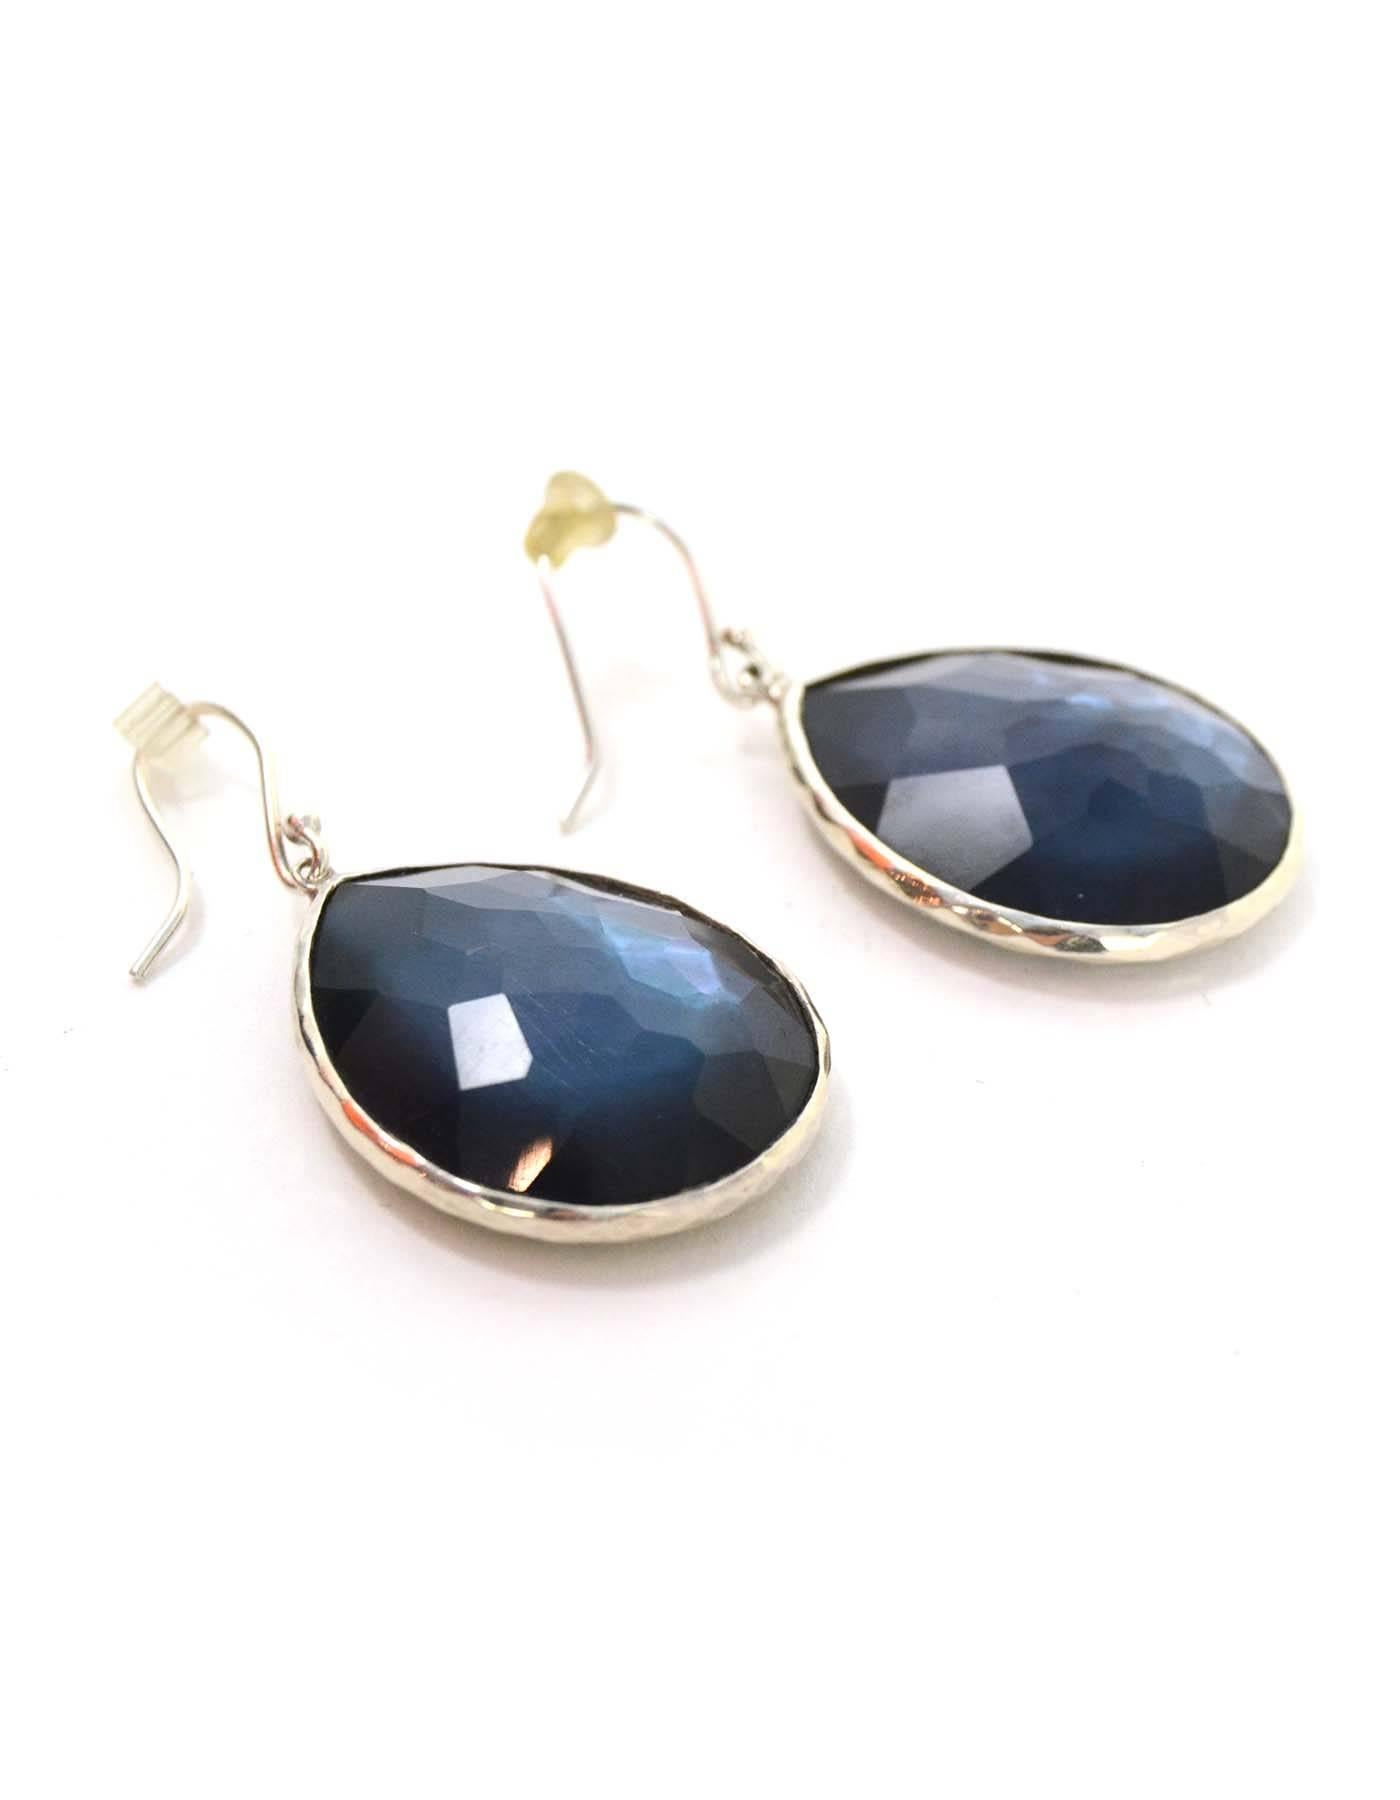 Ippolita 'Rockcandy' Topaz Sterling Earrings
Features translucent London Blue Topaz
Color: Topaz blue and silver
Materials: Sterling silver and topaz
Closure: Fish hook with rubber back 
Stamp: Ippolita 925
Retail Price: $995 + tax
Overall